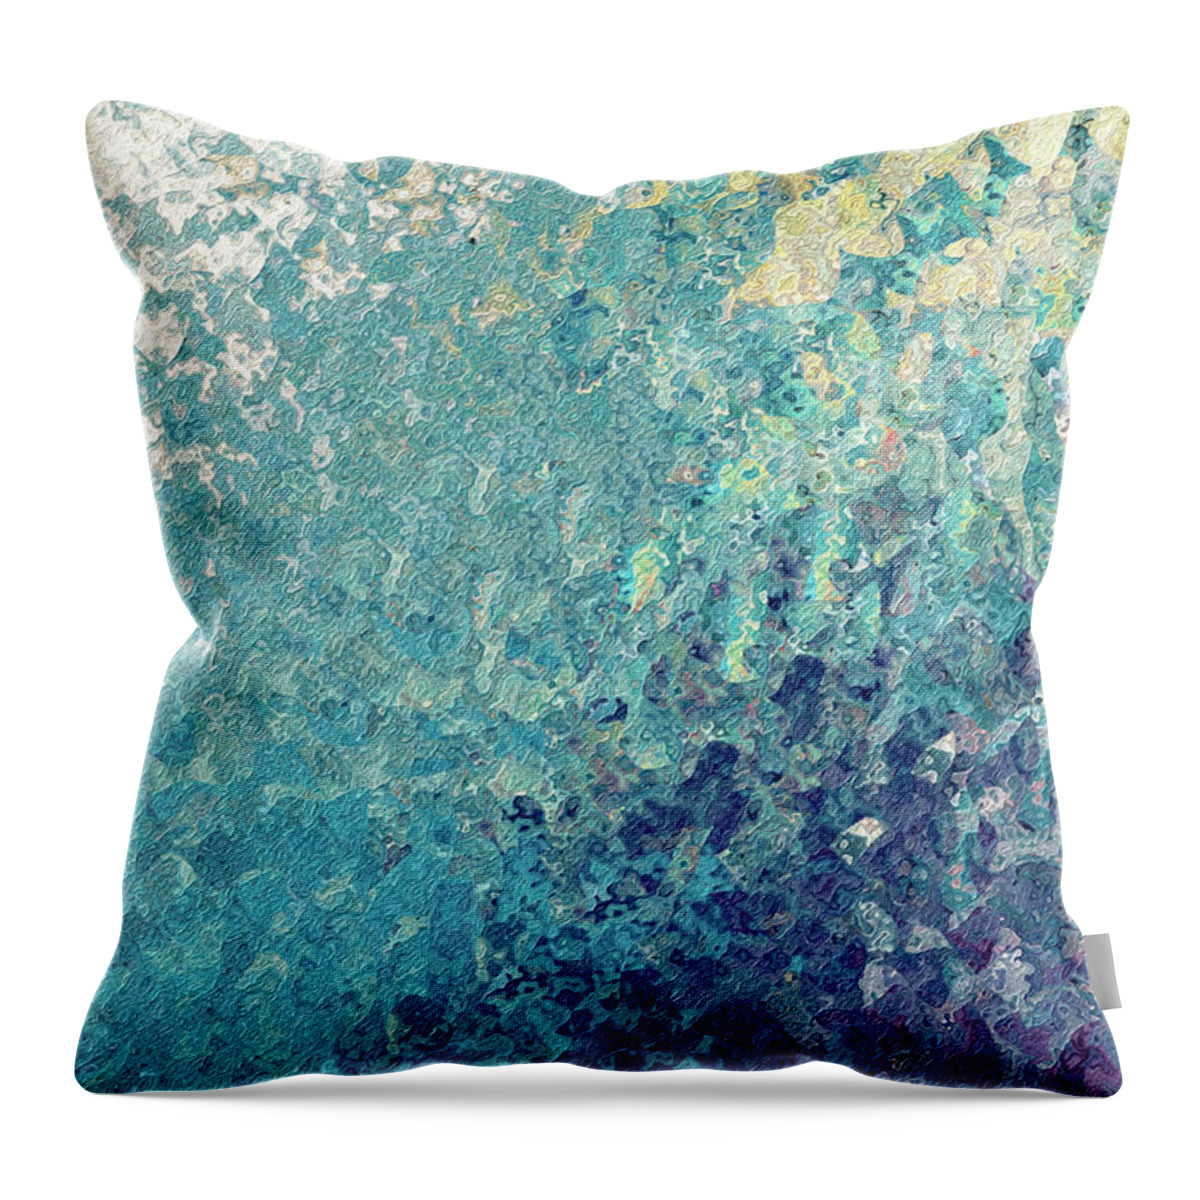 Blue Throw Pillow featuring the painting Isaiah 12 2. My Strength And Song. by Mark Lawrence